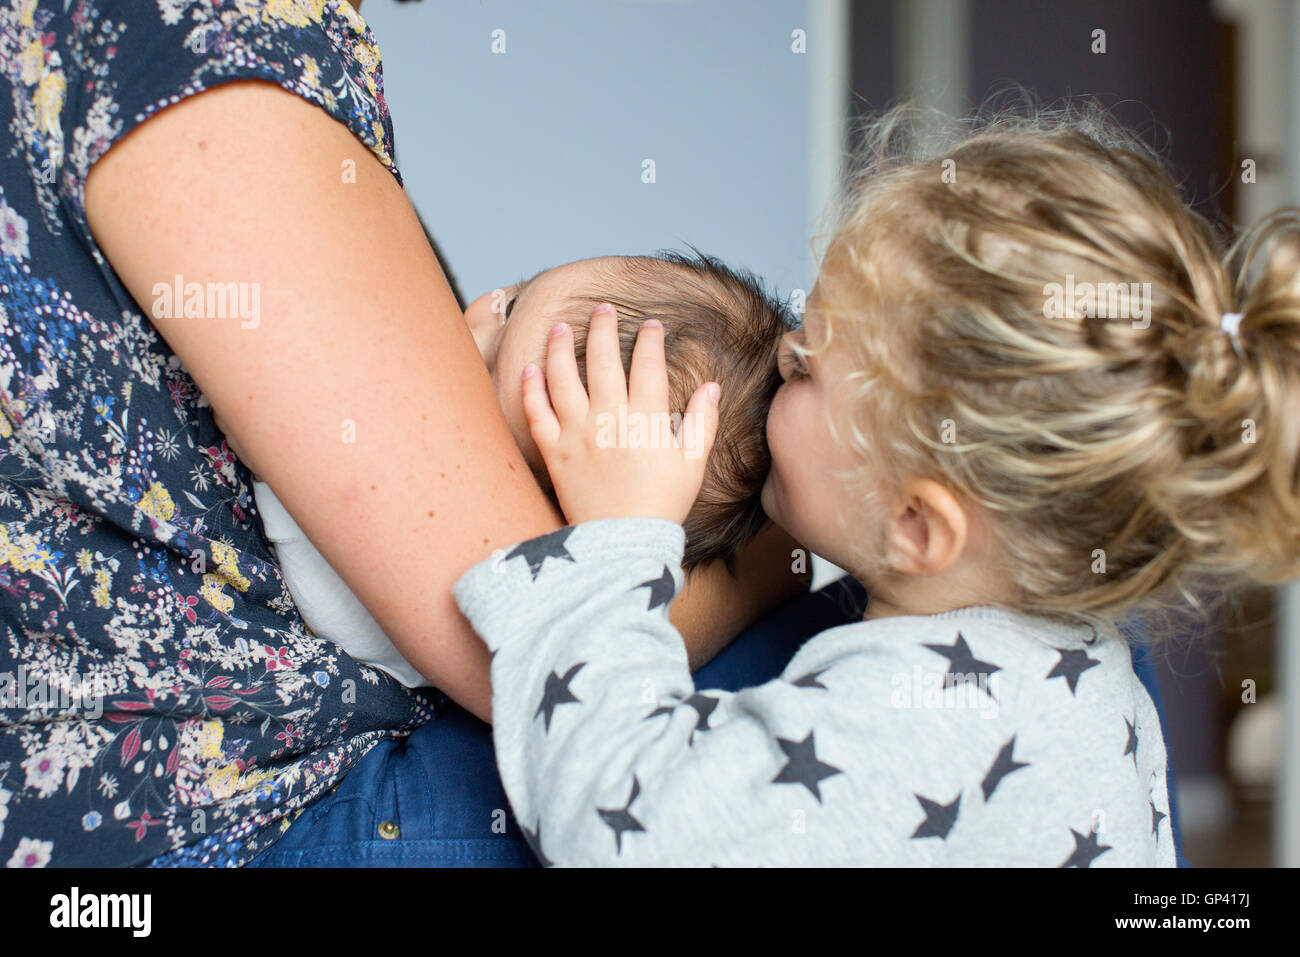 Mother with baby and little girl Stock Photo